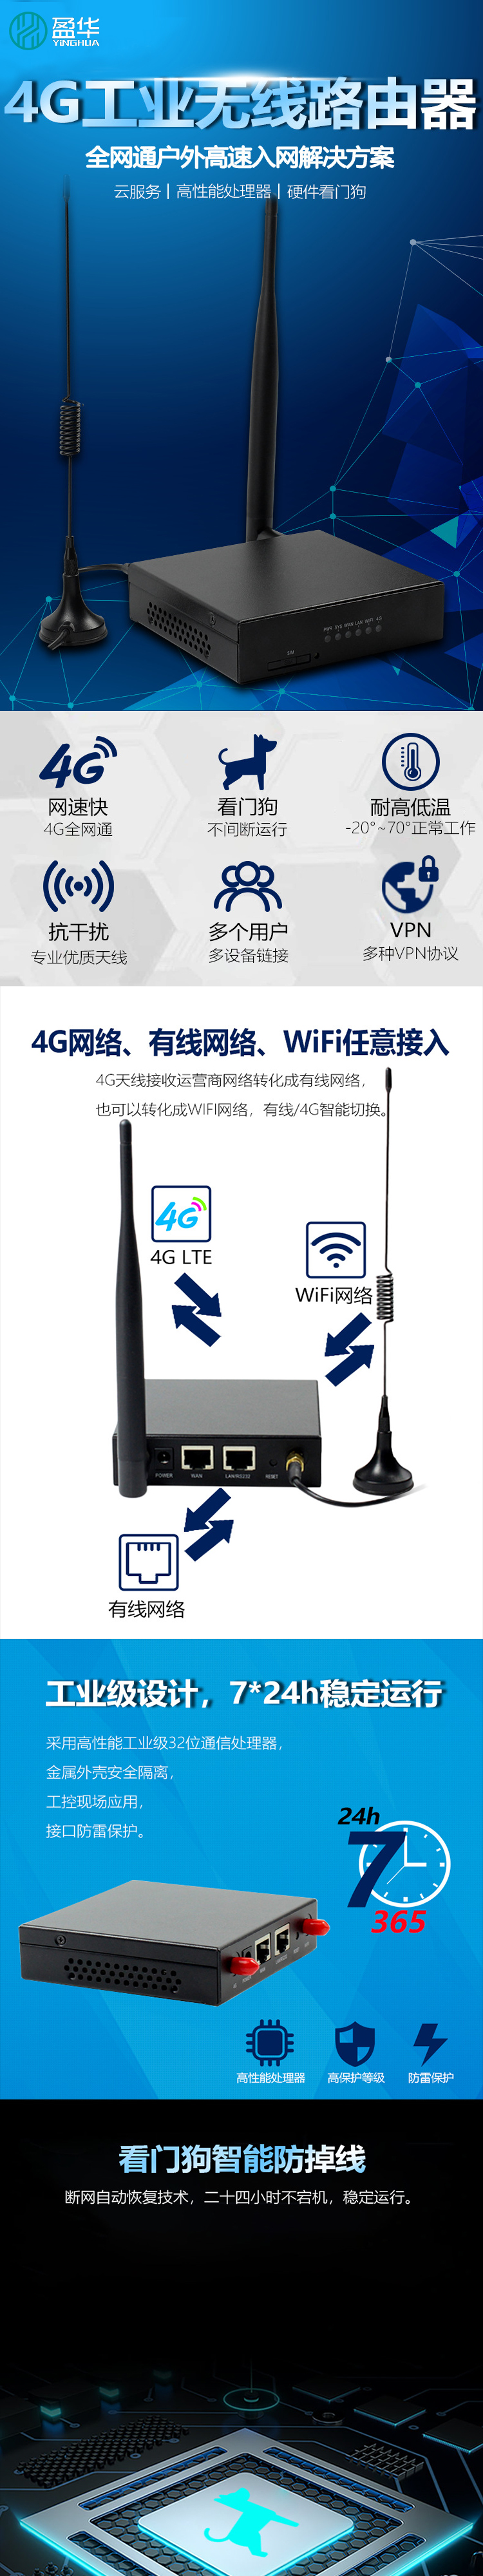 Wall-mounted full network plug in SIM card ready to use industrial grade WiFi 4g wireless router